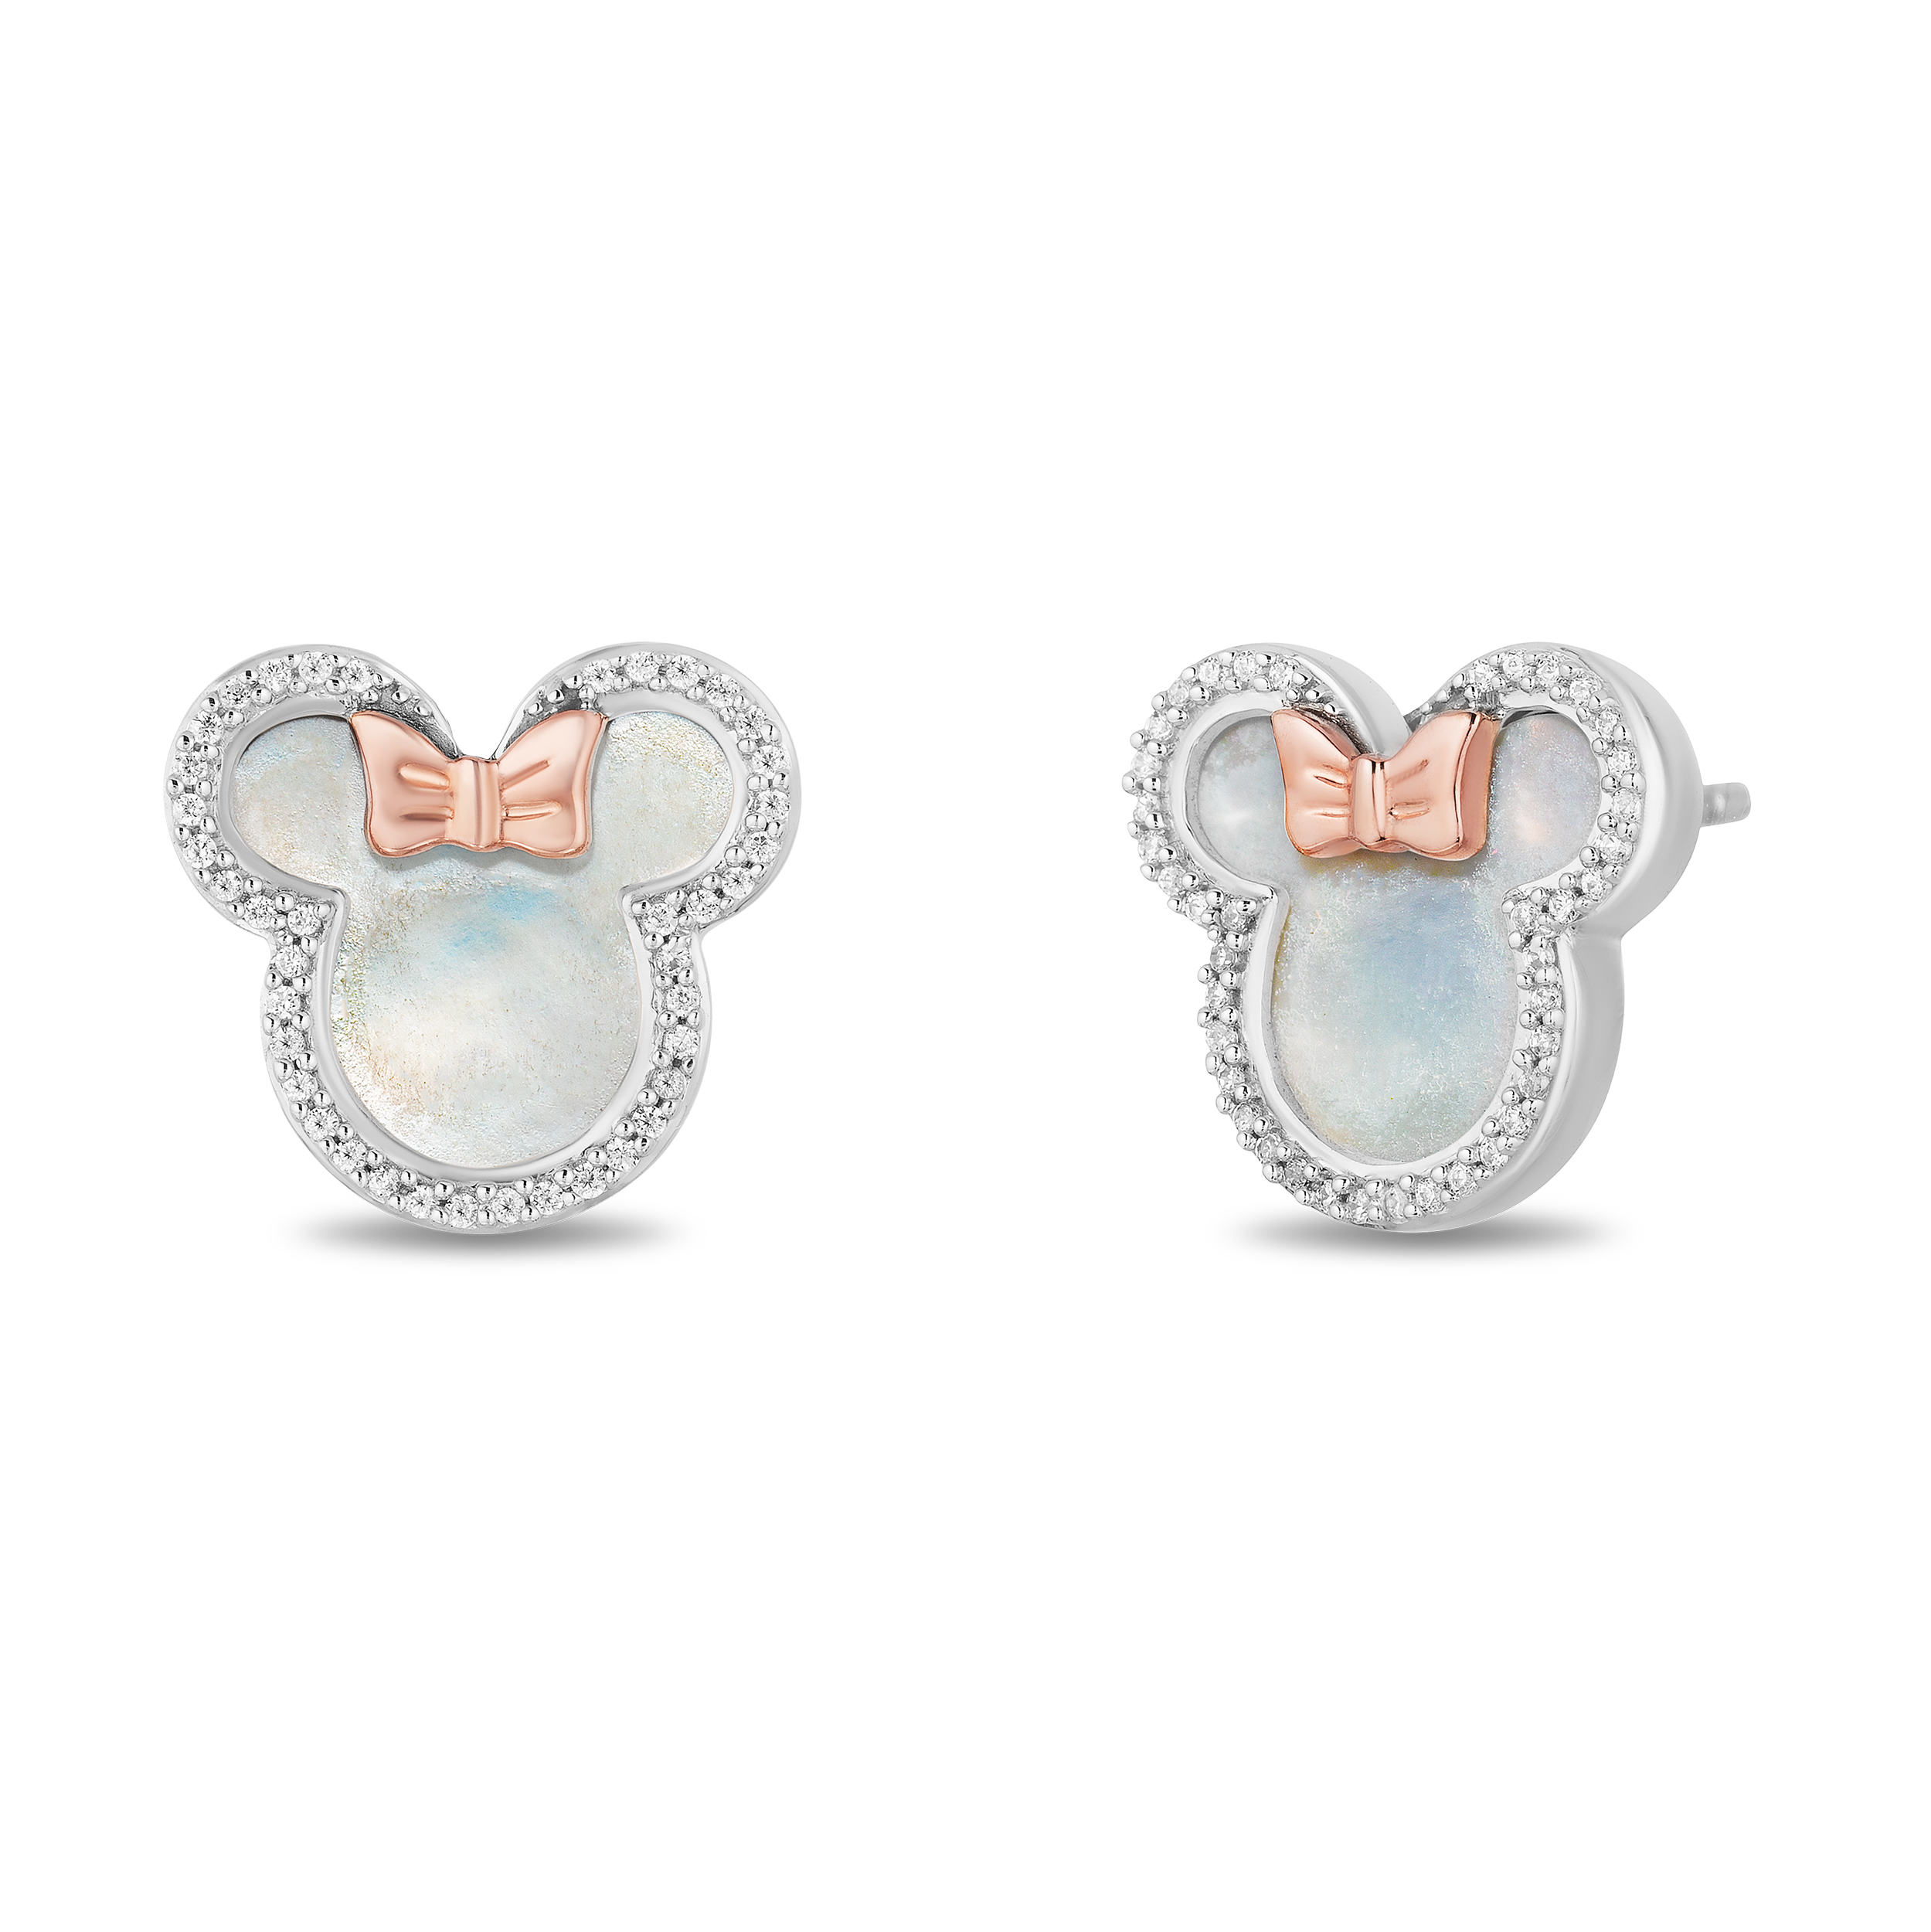 Kay Jewelers Expands Disney Treasures Collection to All Stores